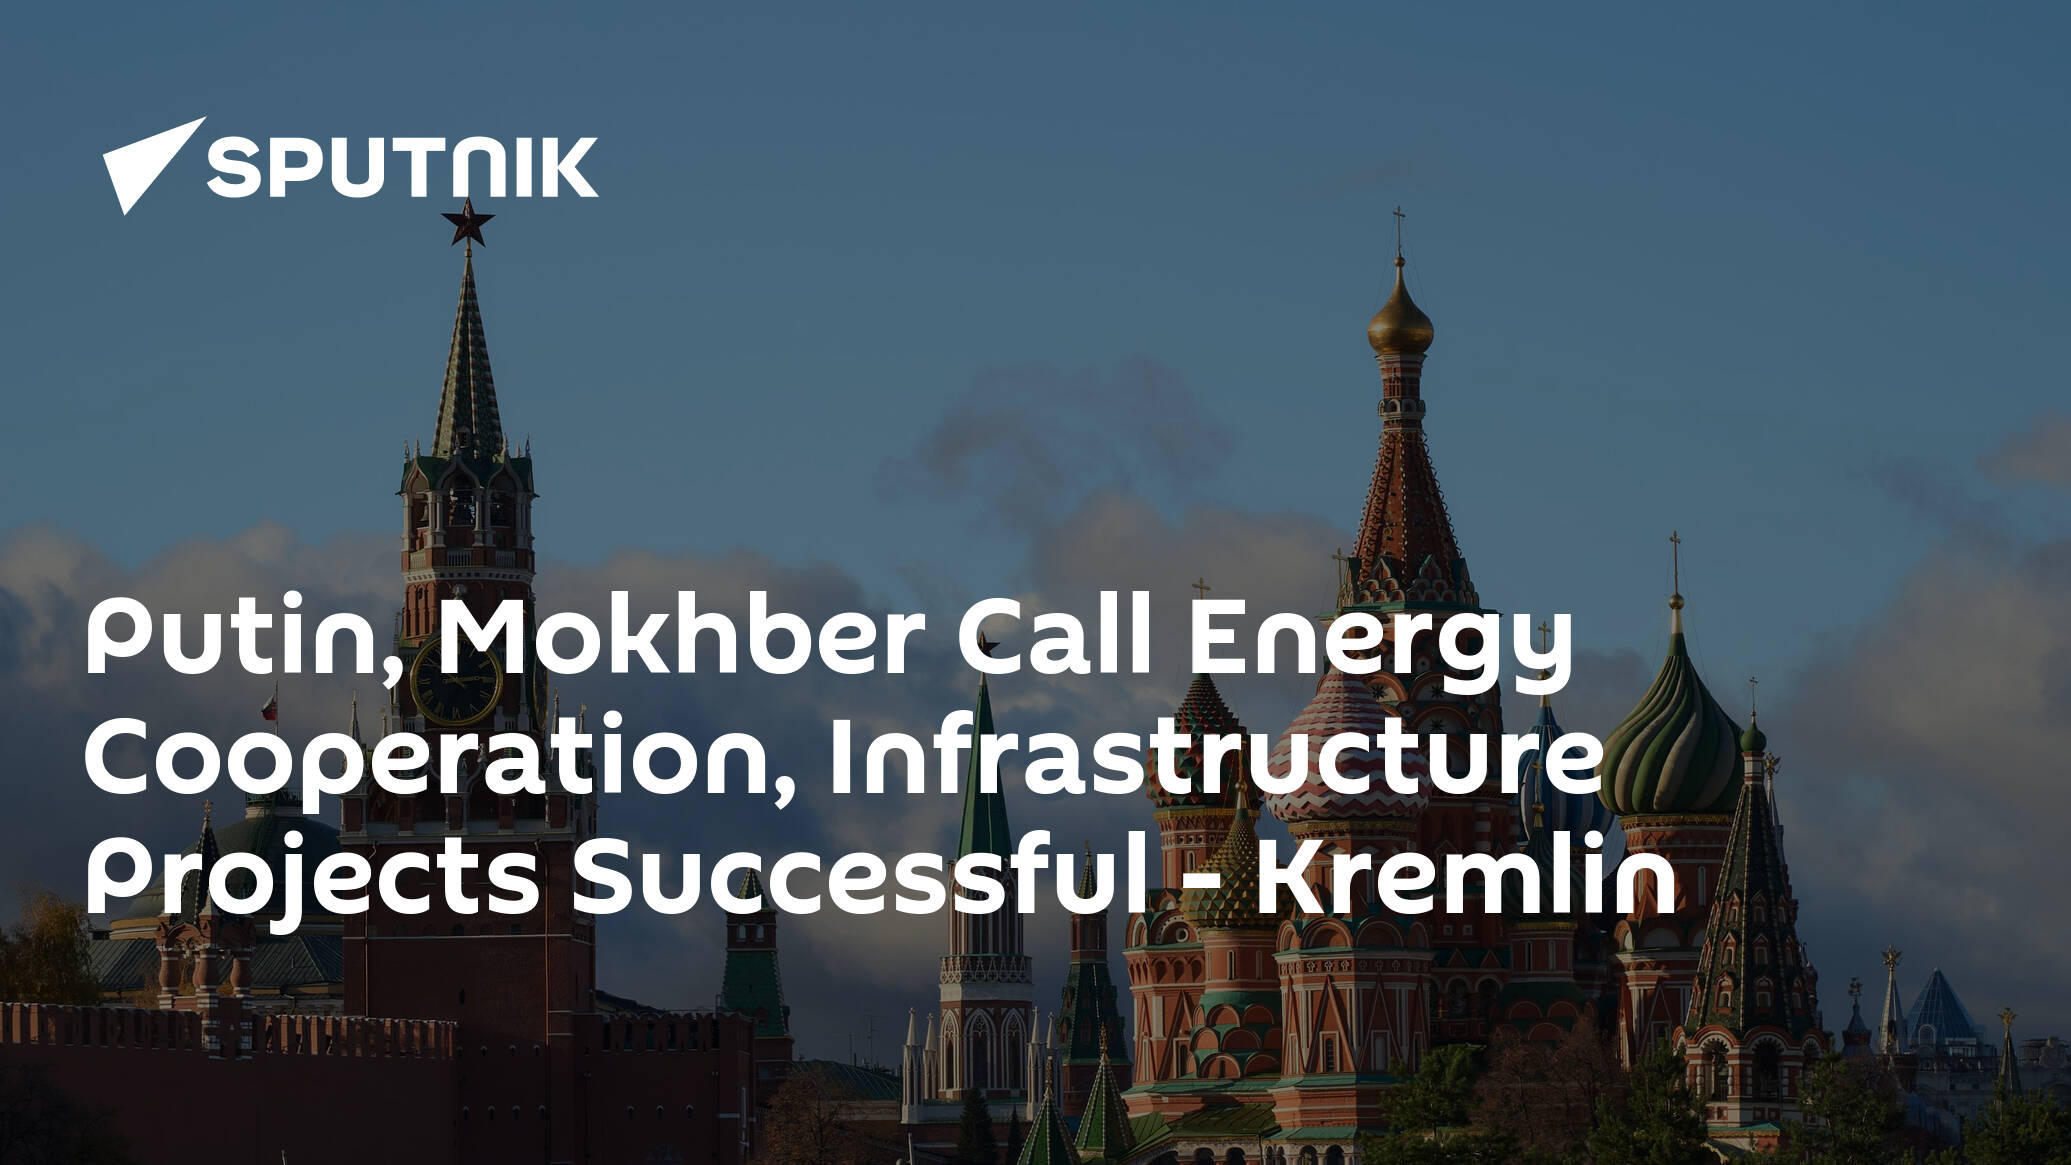 Putin, Mokhber Call Energy Cooperation, Infrastructure Projects Successful – Kremlin